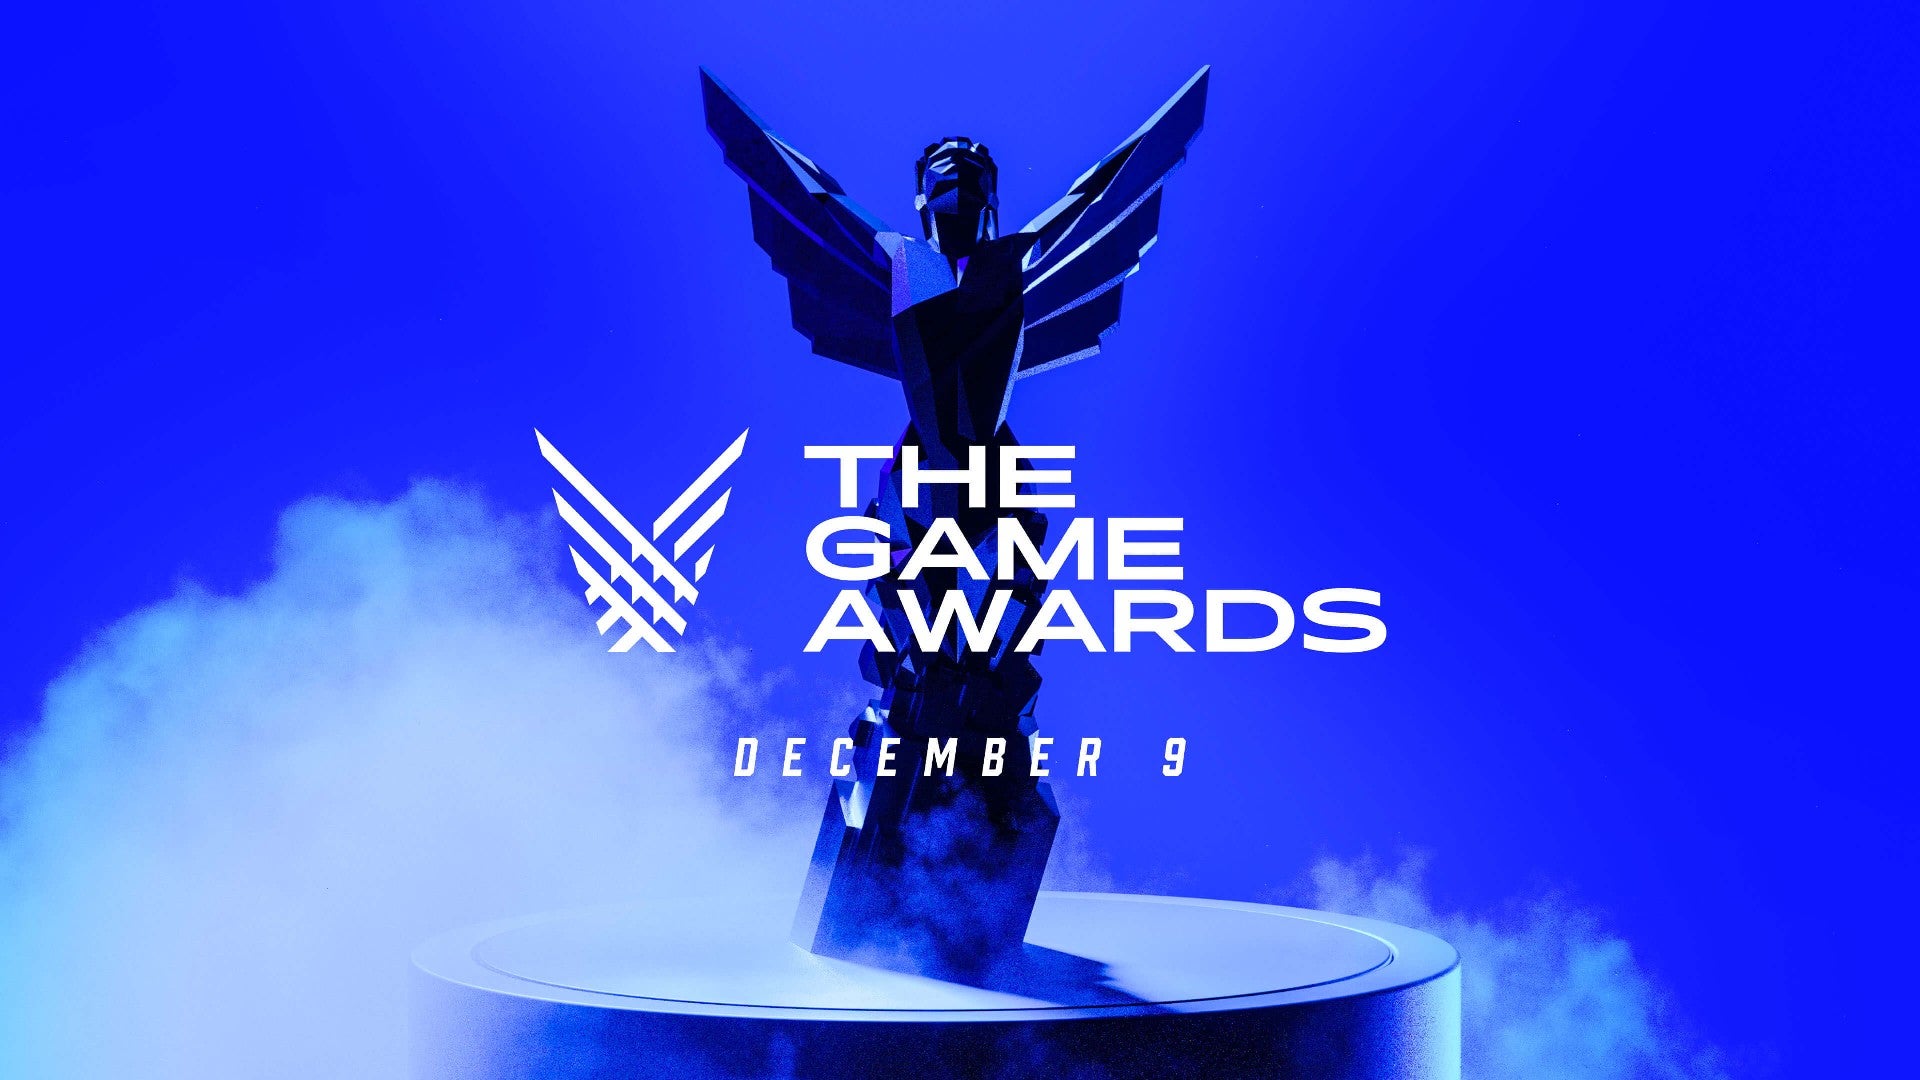 The Game Awards 2021: Nominees, start times, and where to watch - Rock Paper Shotgun